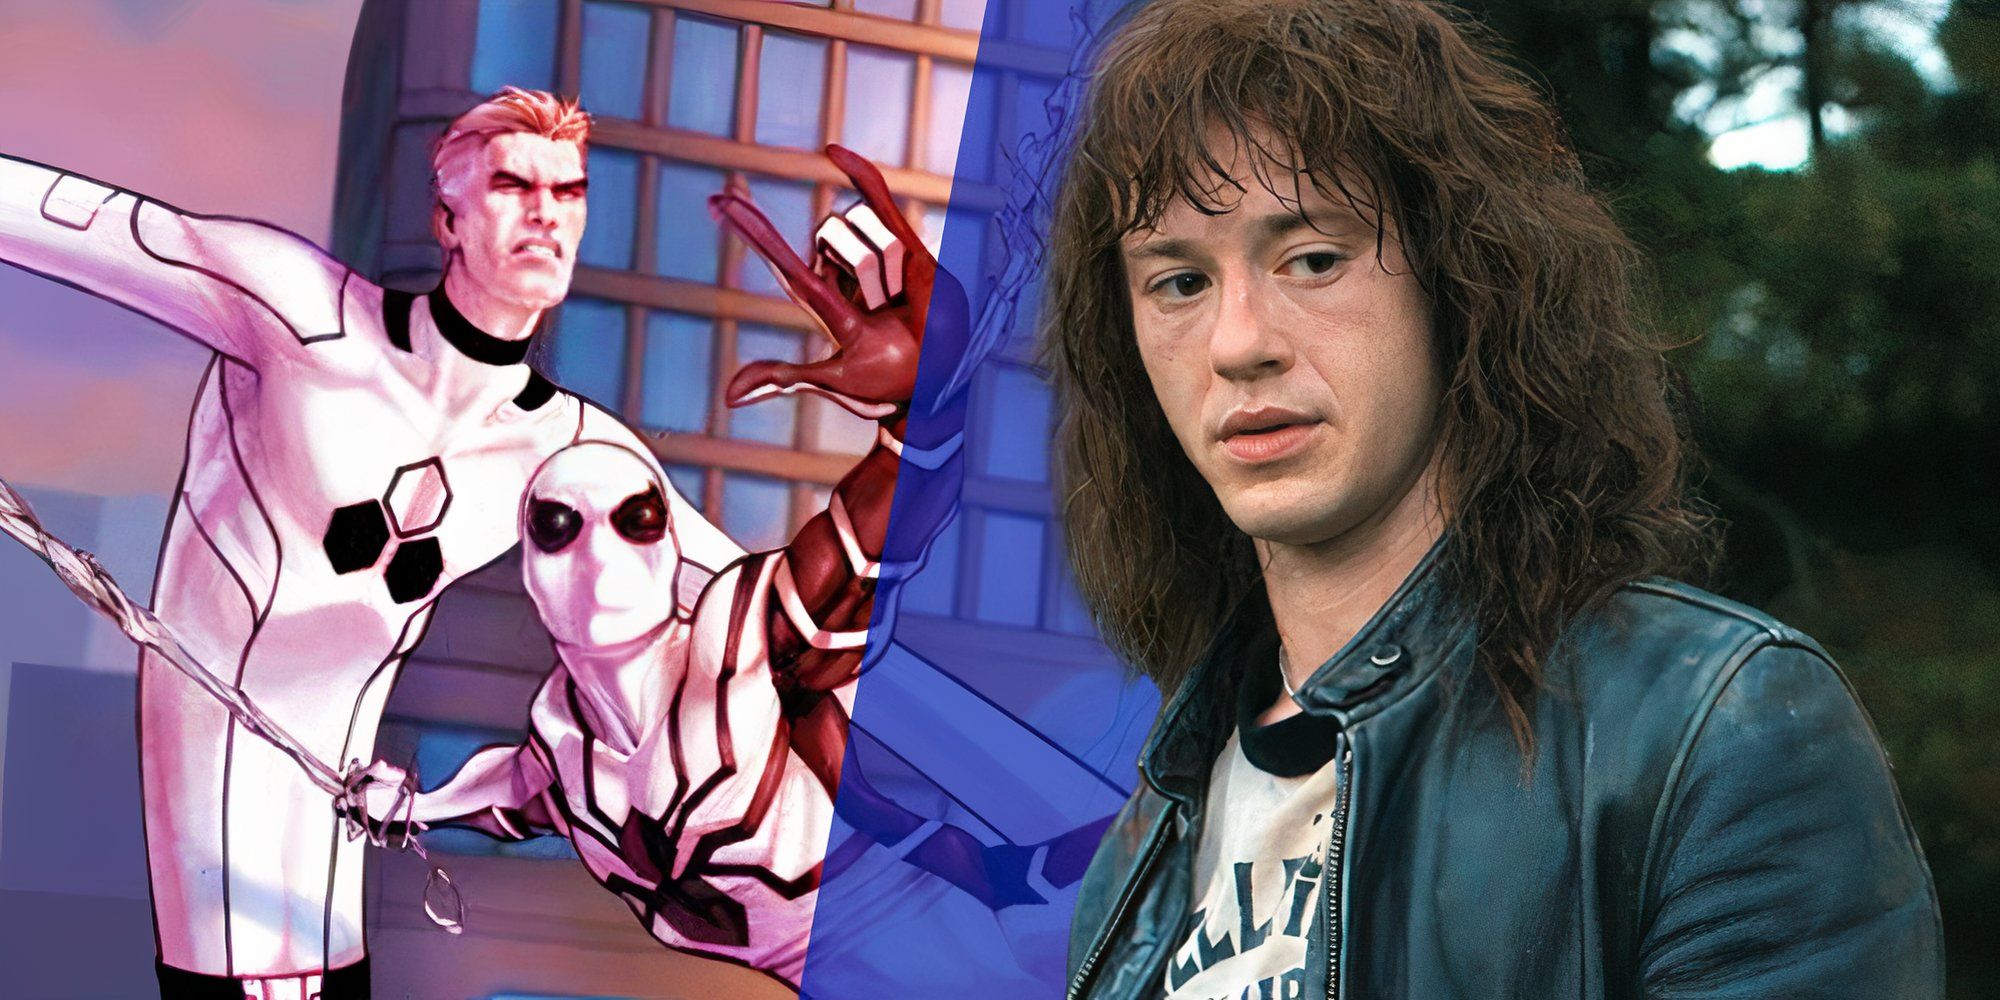 Joseph Quinn as Eddie Munson from Stranger Things season 4 (2022) next to artwork of Reed Richards and Spider-Man in the Future Foundation